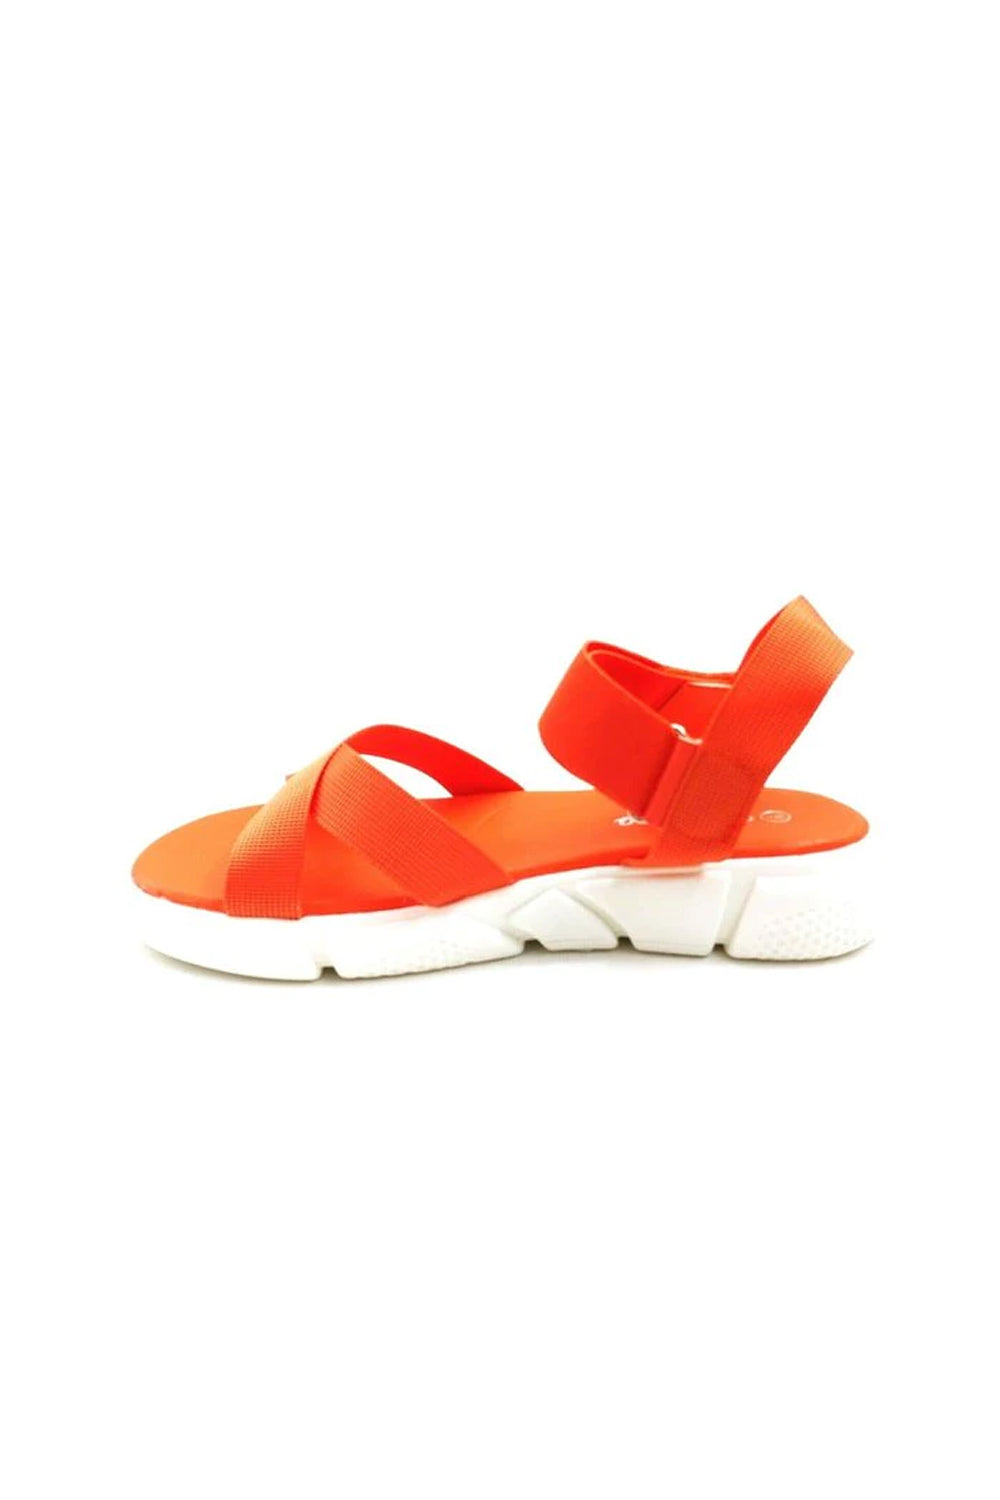 Weeboo Abigail Sandals Ankle Strap